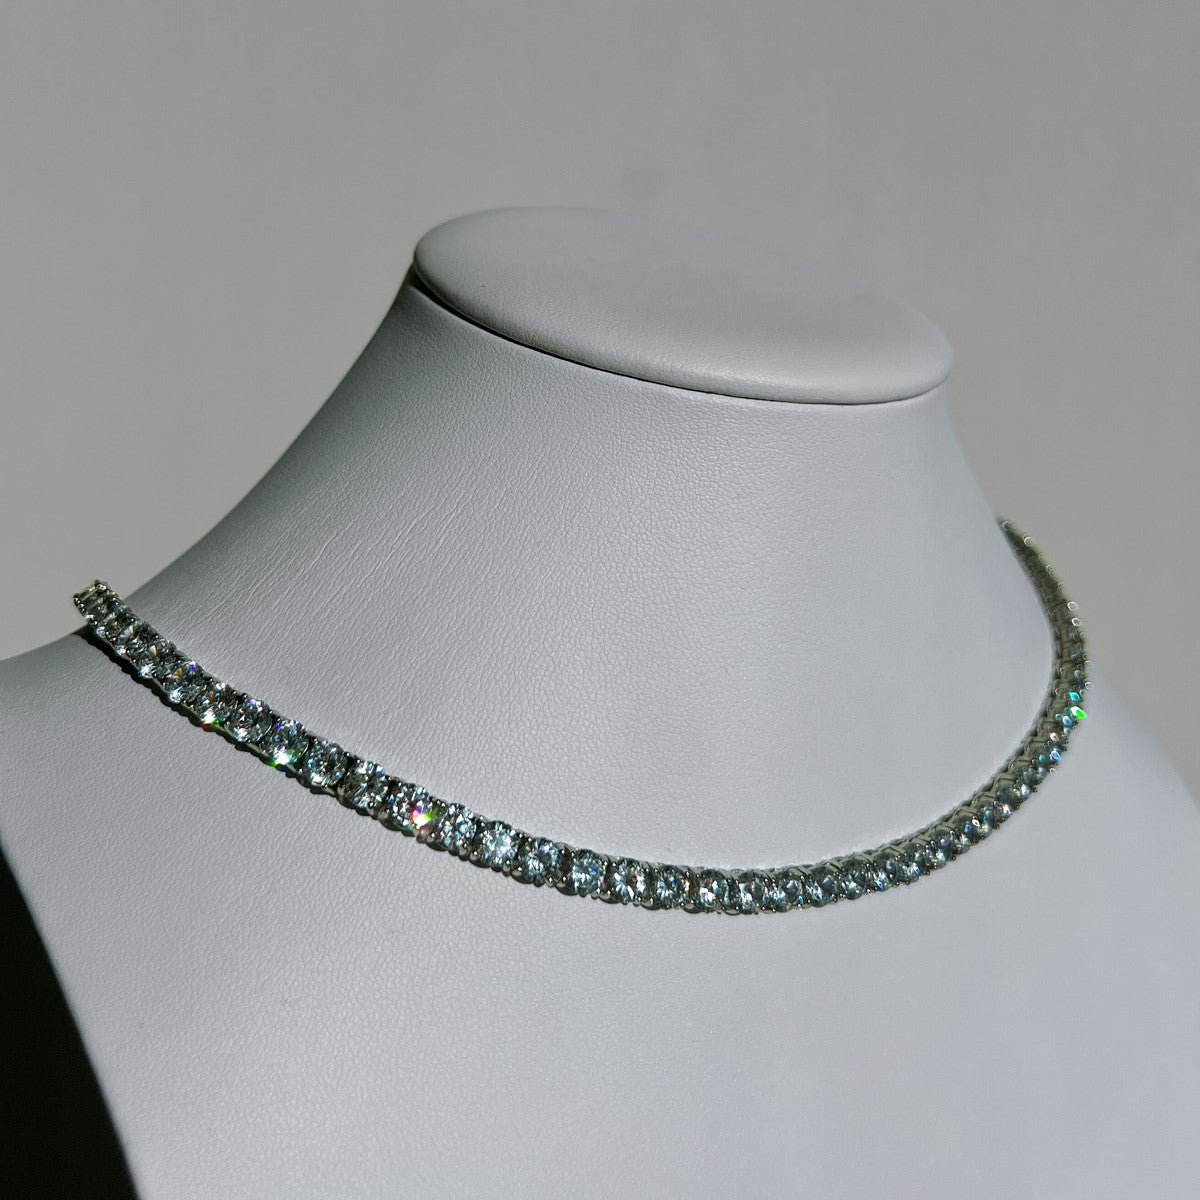 TENNIS NECKLACE "SIMPLE THING" WITH CZ 5 / SILVER